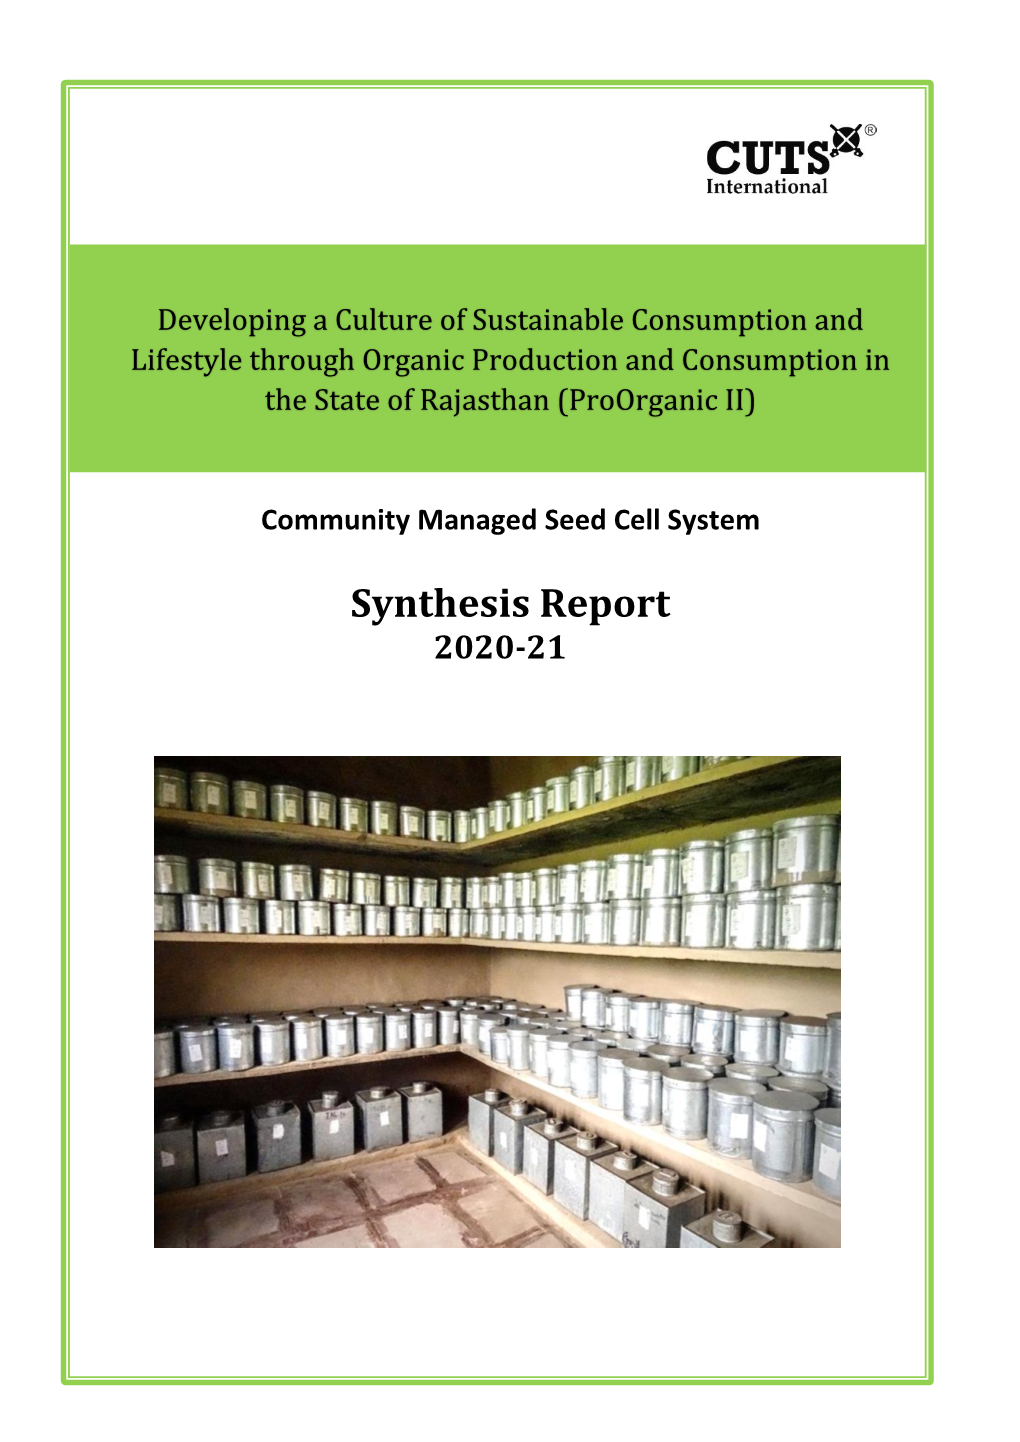 Synthesis Report Community Seed Cell-2020-21